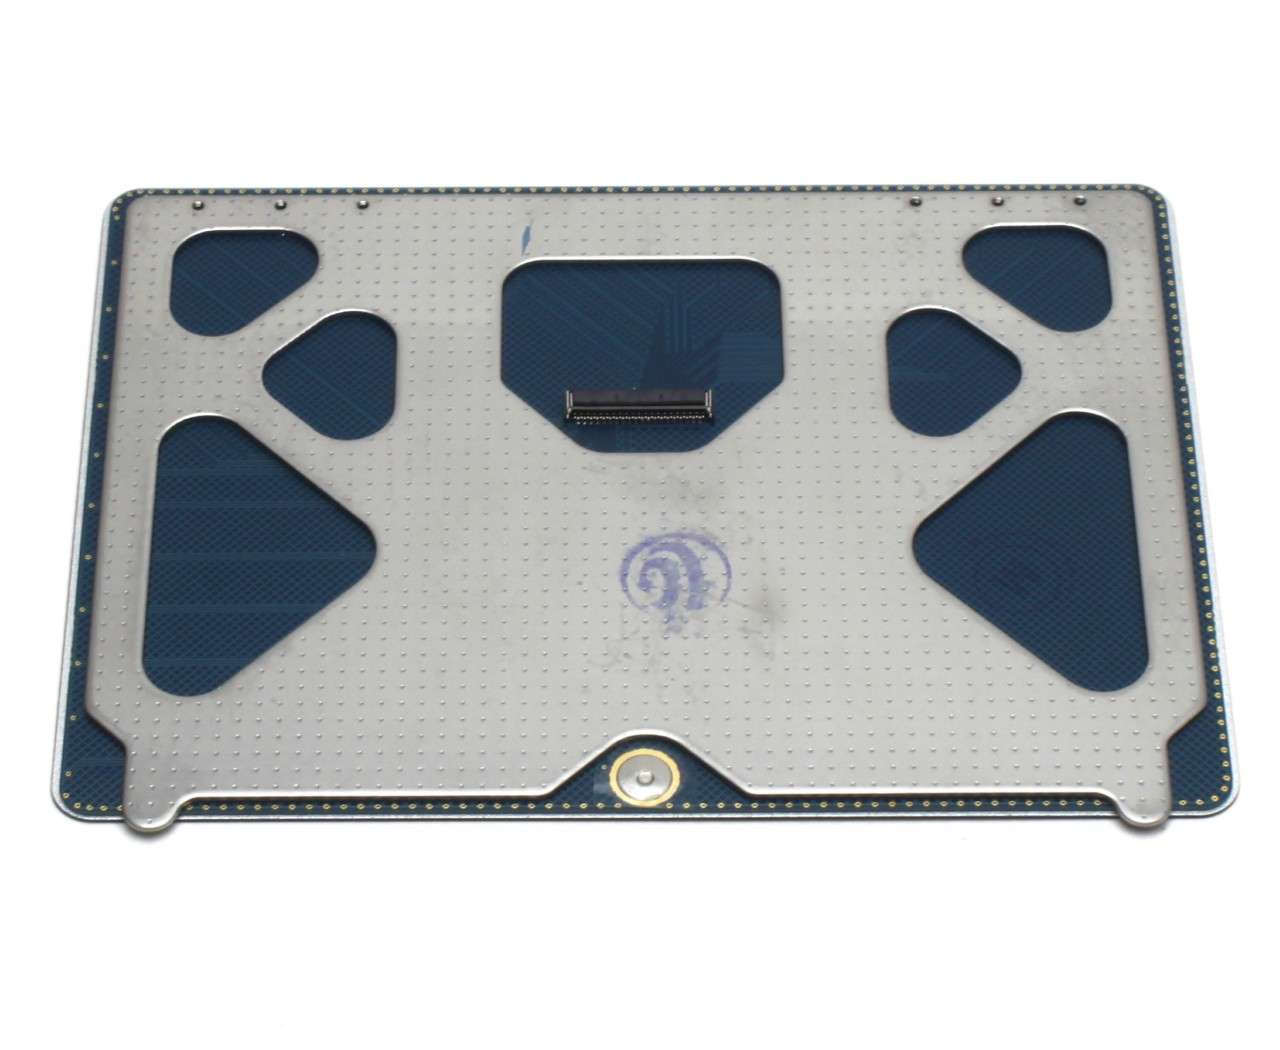 Touchpad Apple Macbook Pro 17 A1297 Mid 2010 Trackpad image0